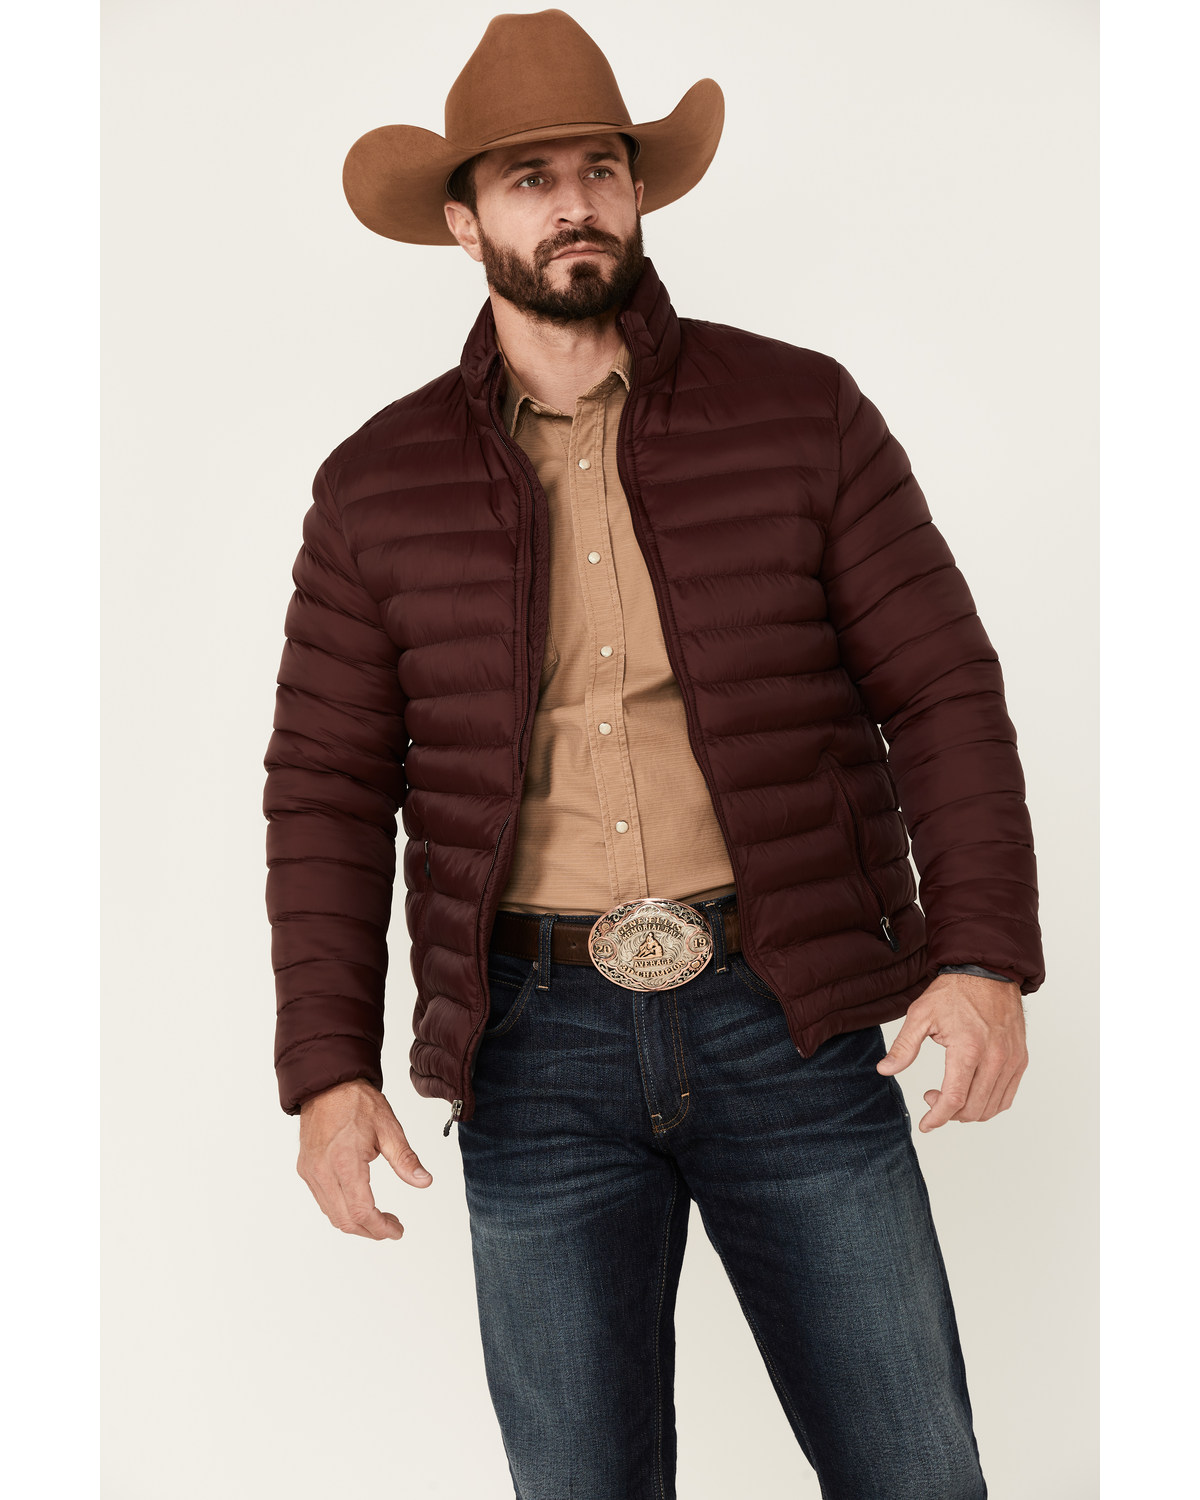 Rodeo Clothing Men's Burgundy & Gray Quilted Zip-Front Puffer Jacket